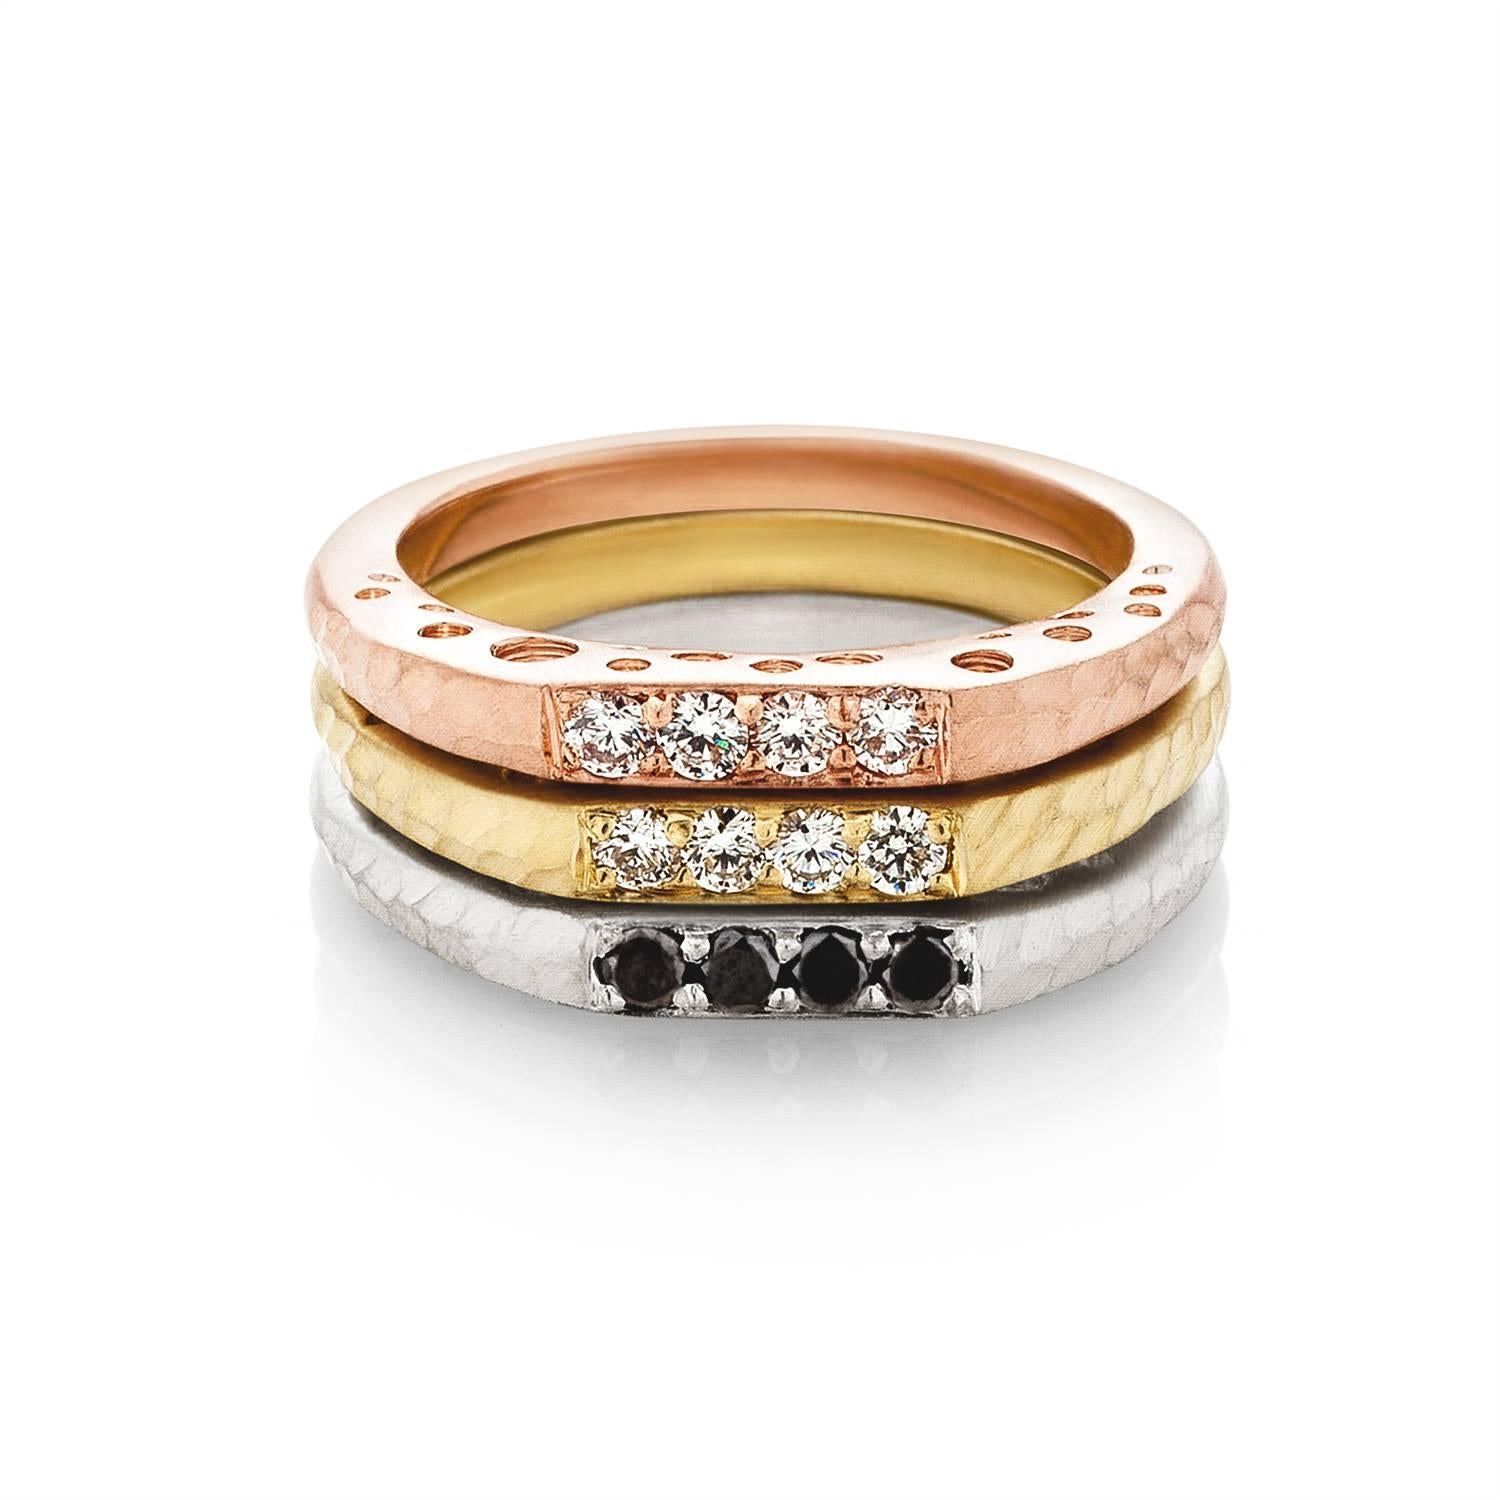 This diamond bar ring features a row of four diamonds bookended by hammered detail. Dots of open space in various sizes and a matte finish align the rings' sides.
An ideal stacking ring, this piece comes as an individual or as a set of three. 

•